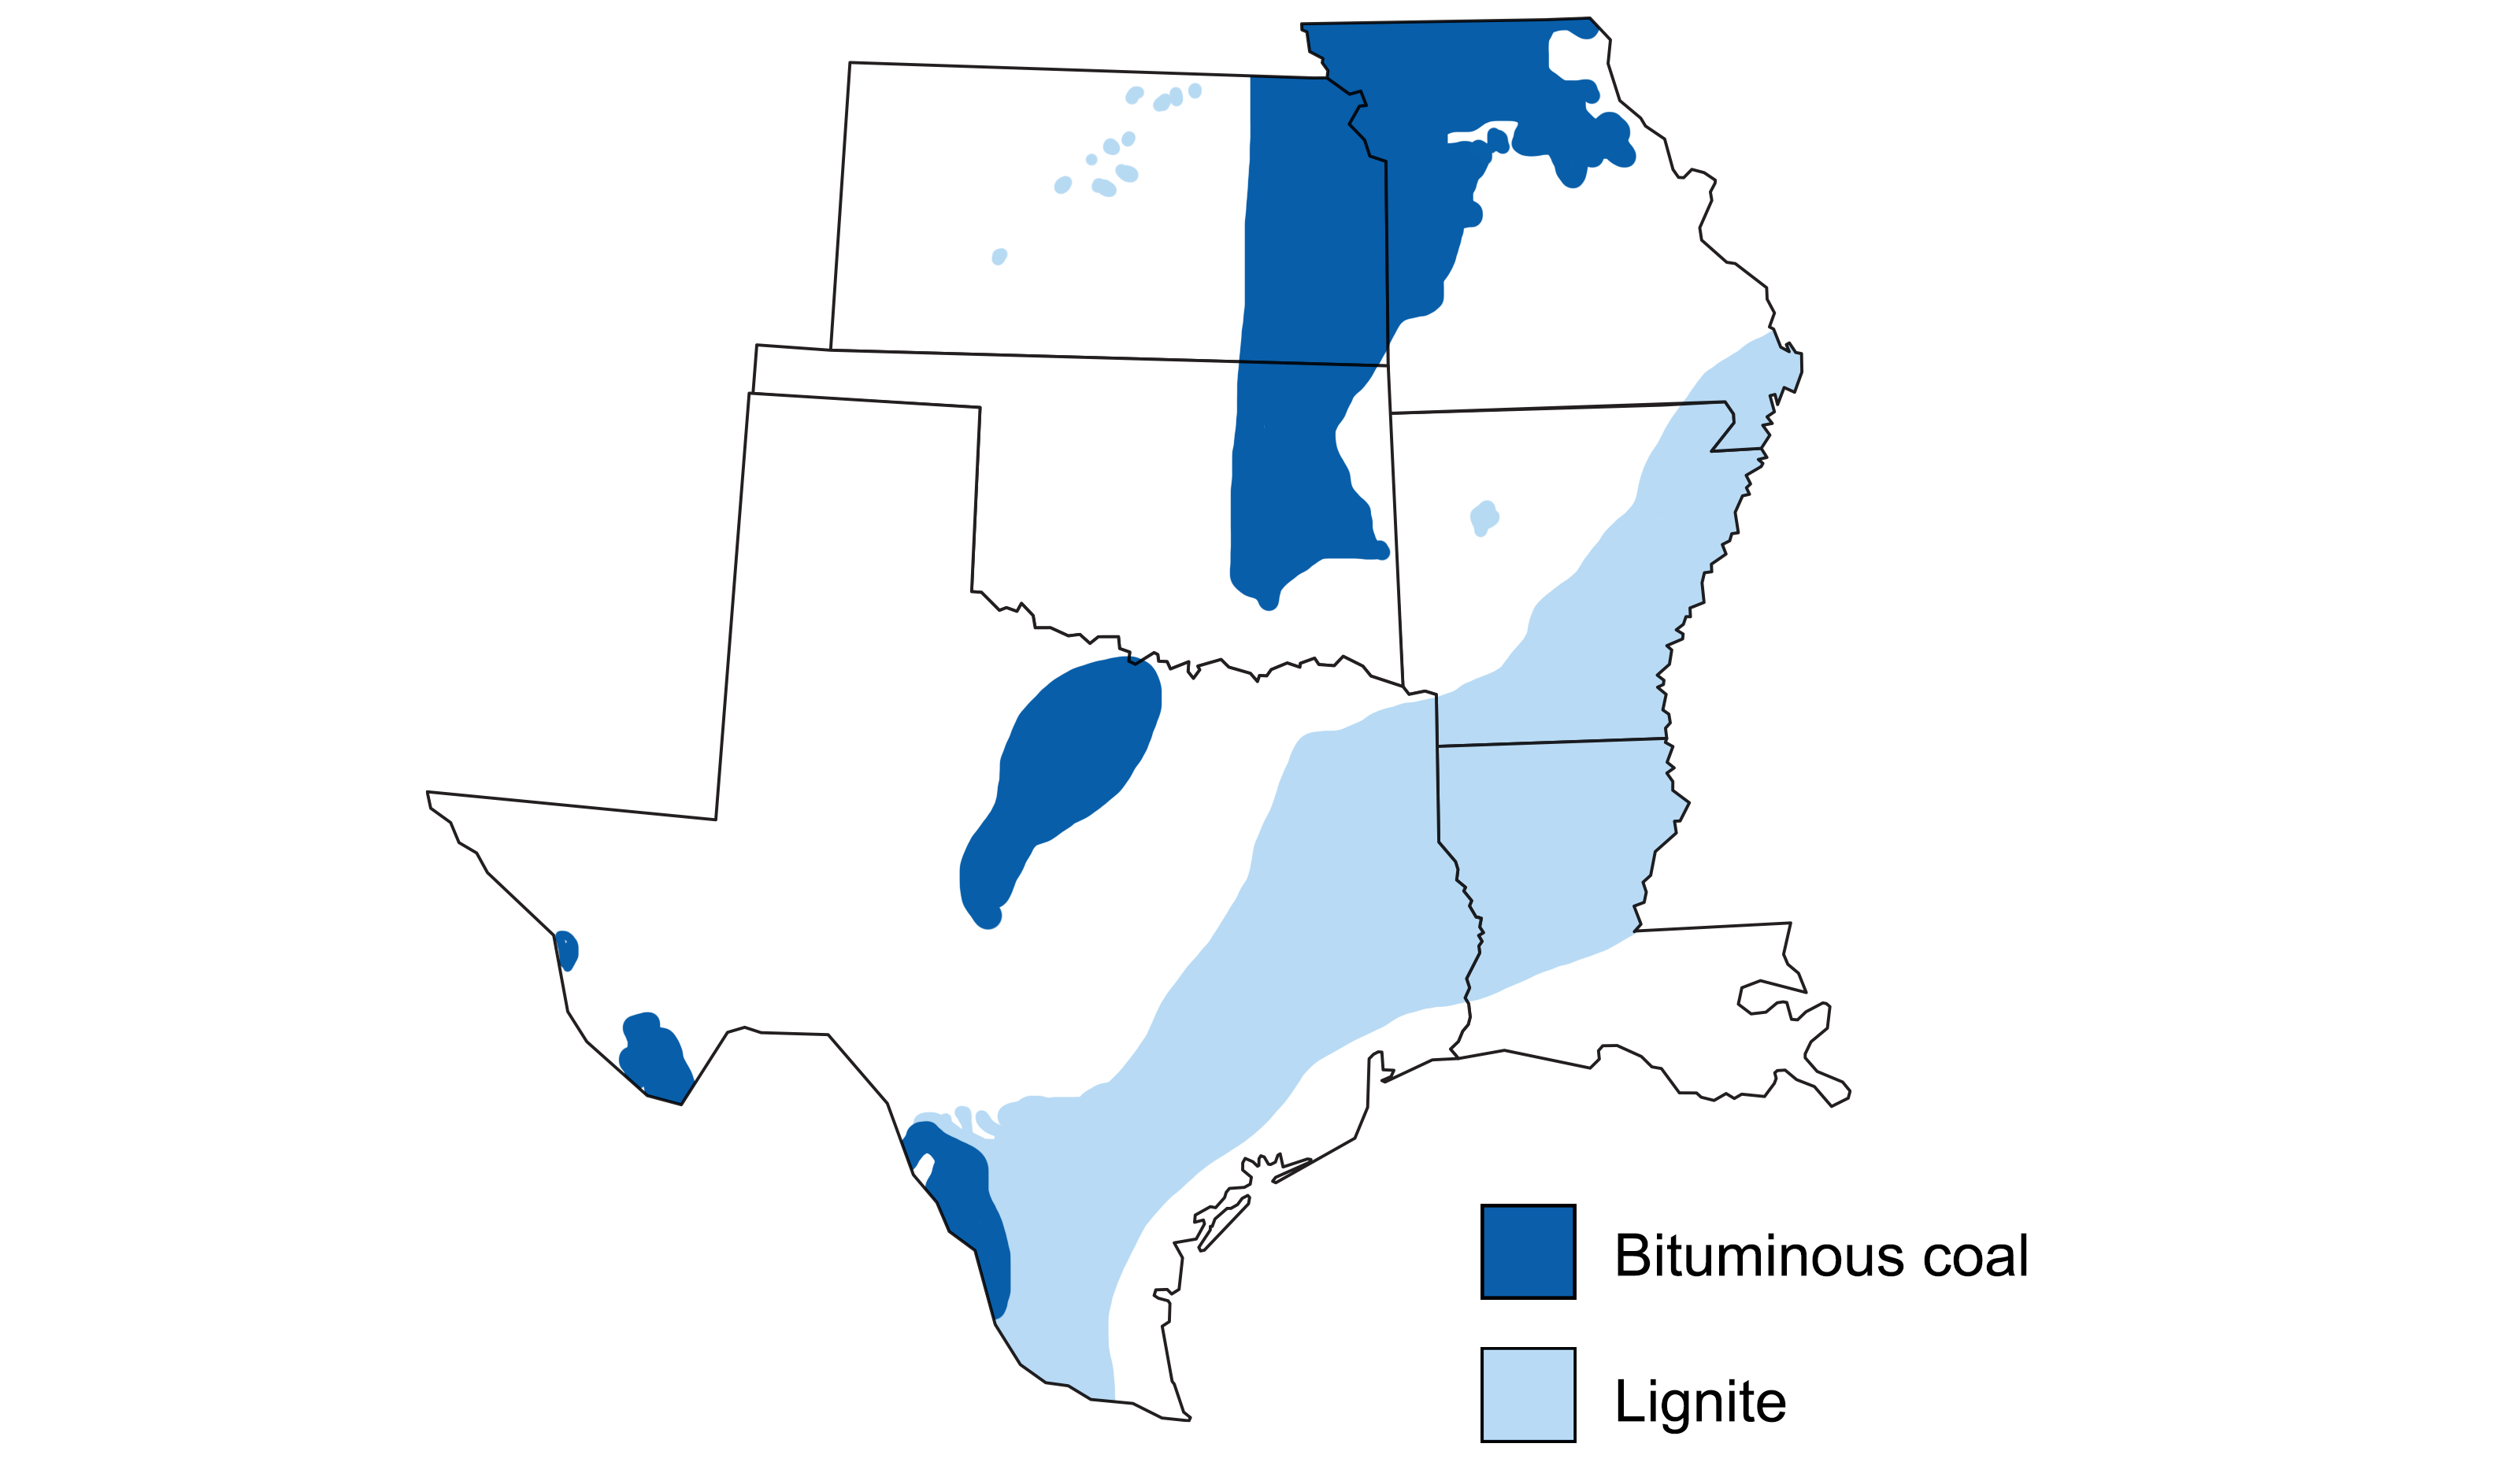 Map of the south-central U.S. showing state boundaries, with shading to show locations of bituminous coal deposits (dark blue) and lignite deposits (light blue).